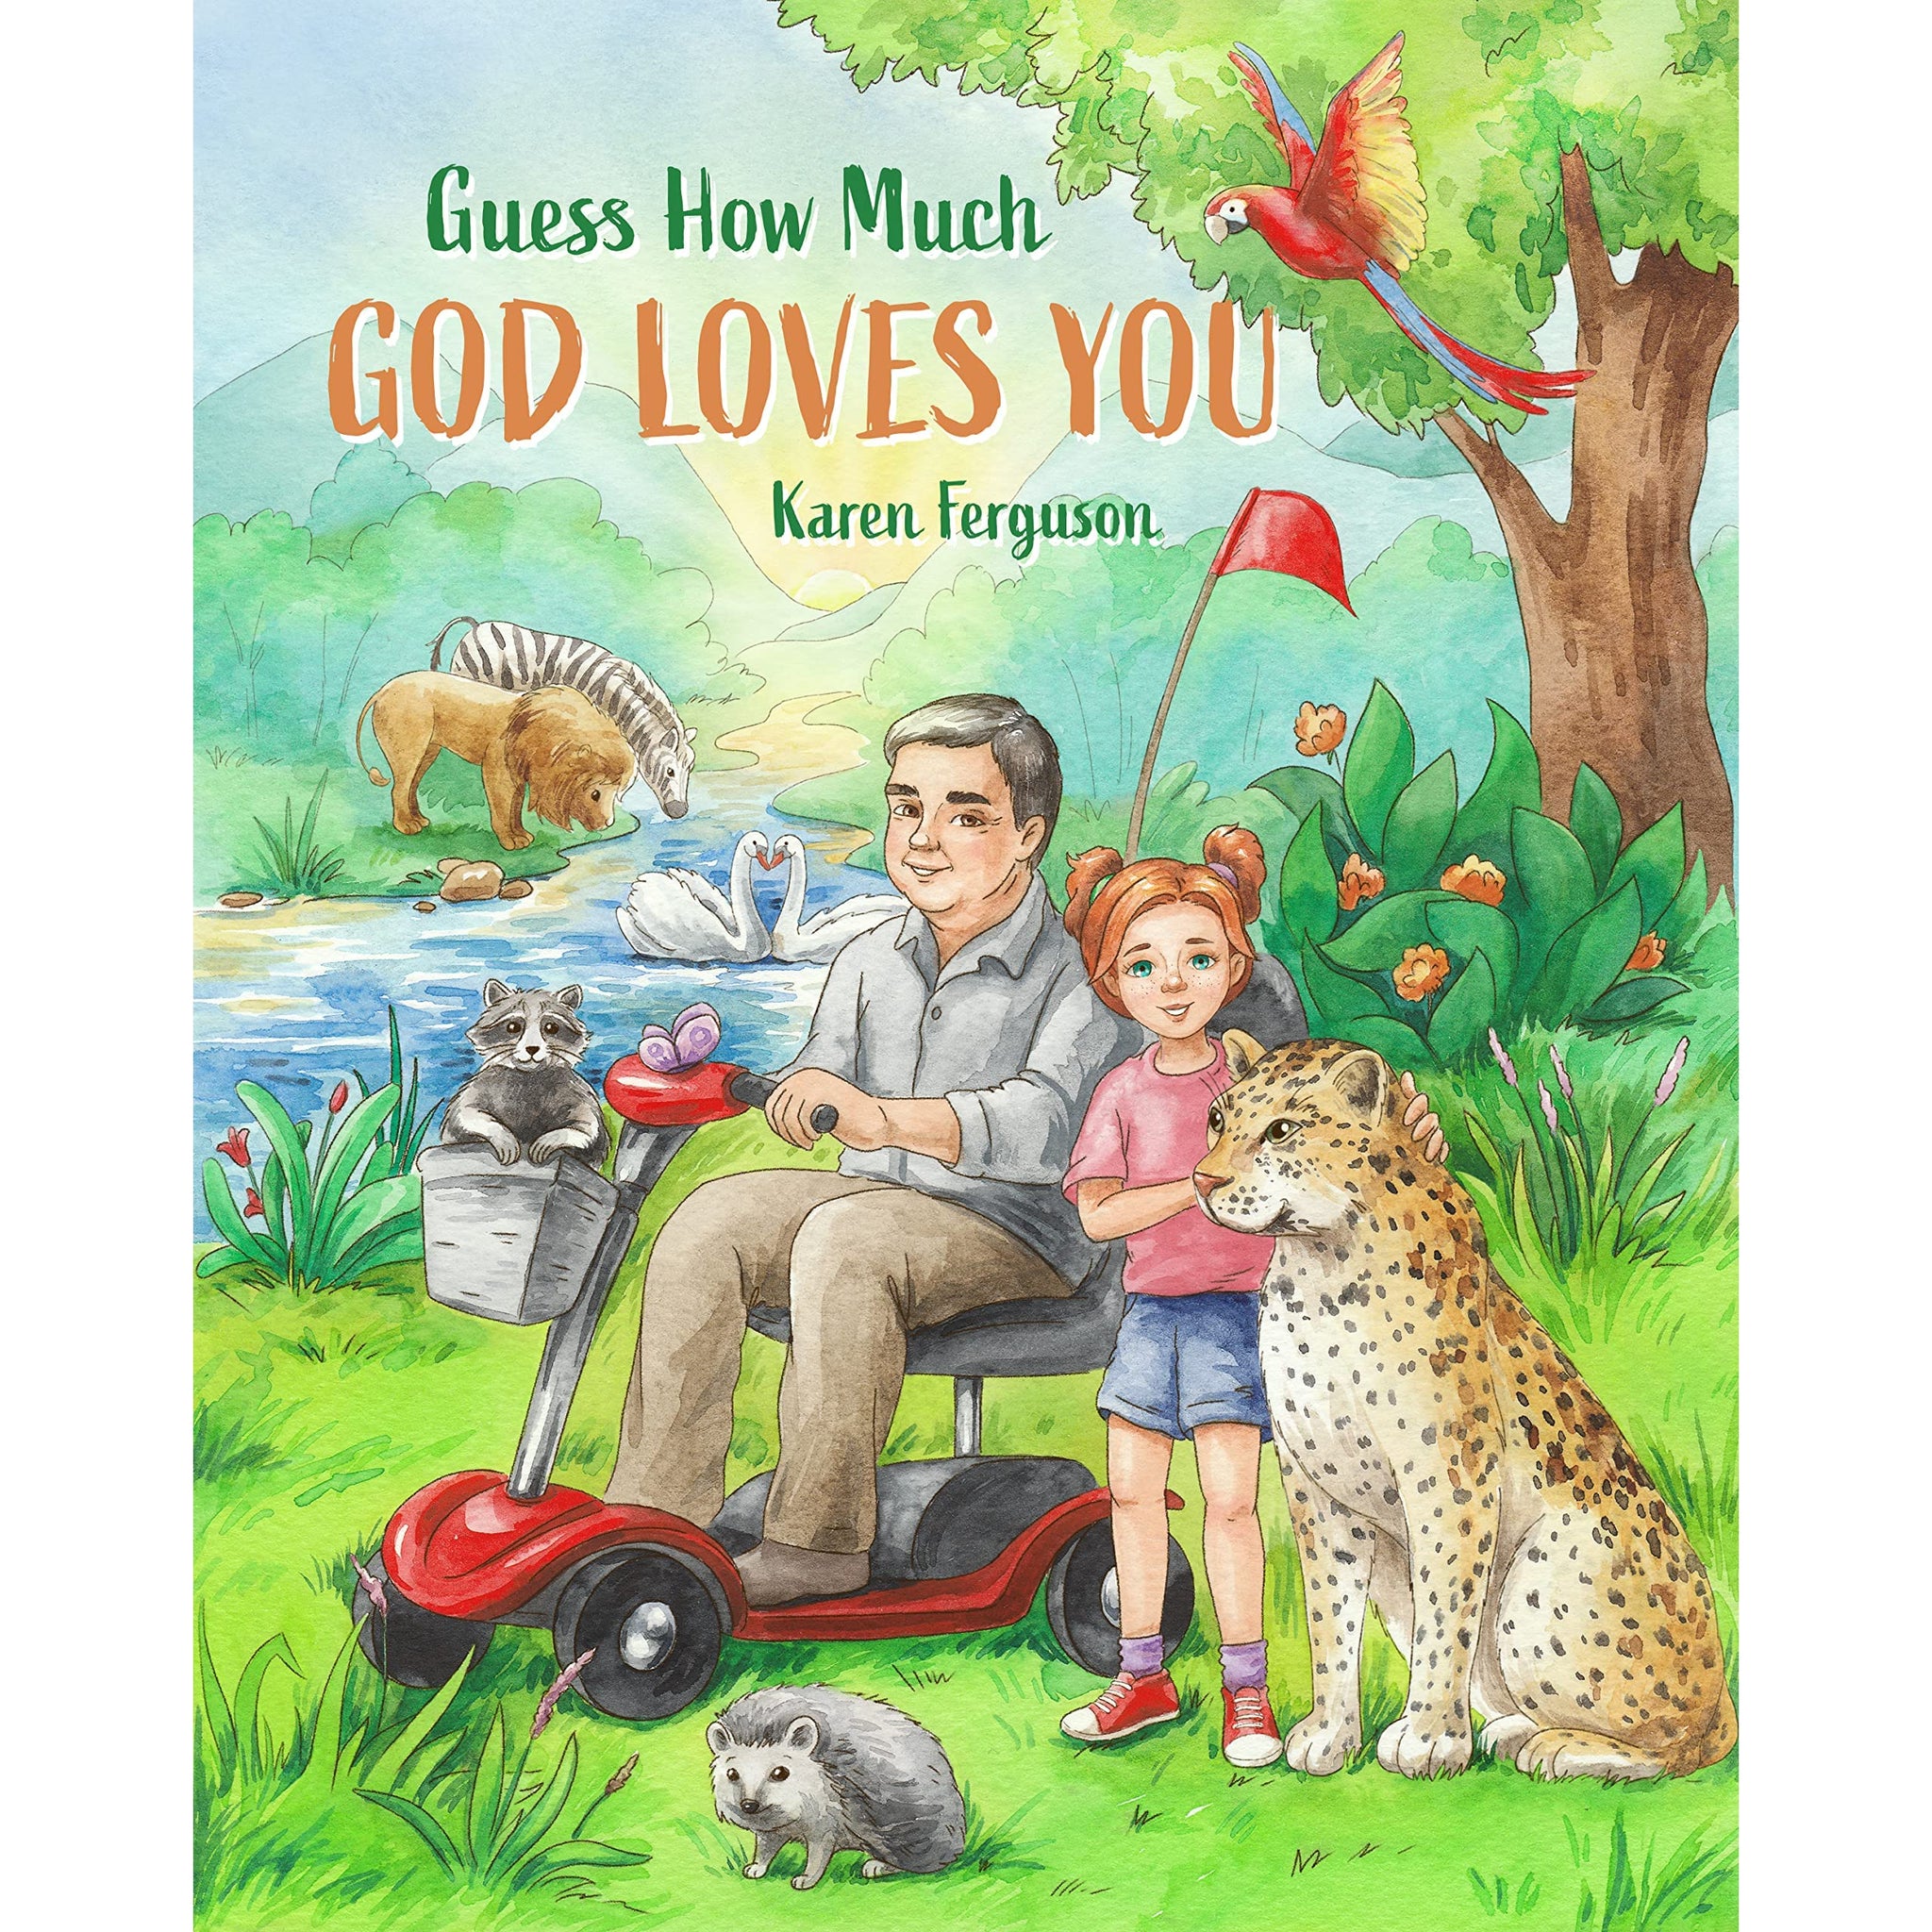 Guess How Much God Loves You